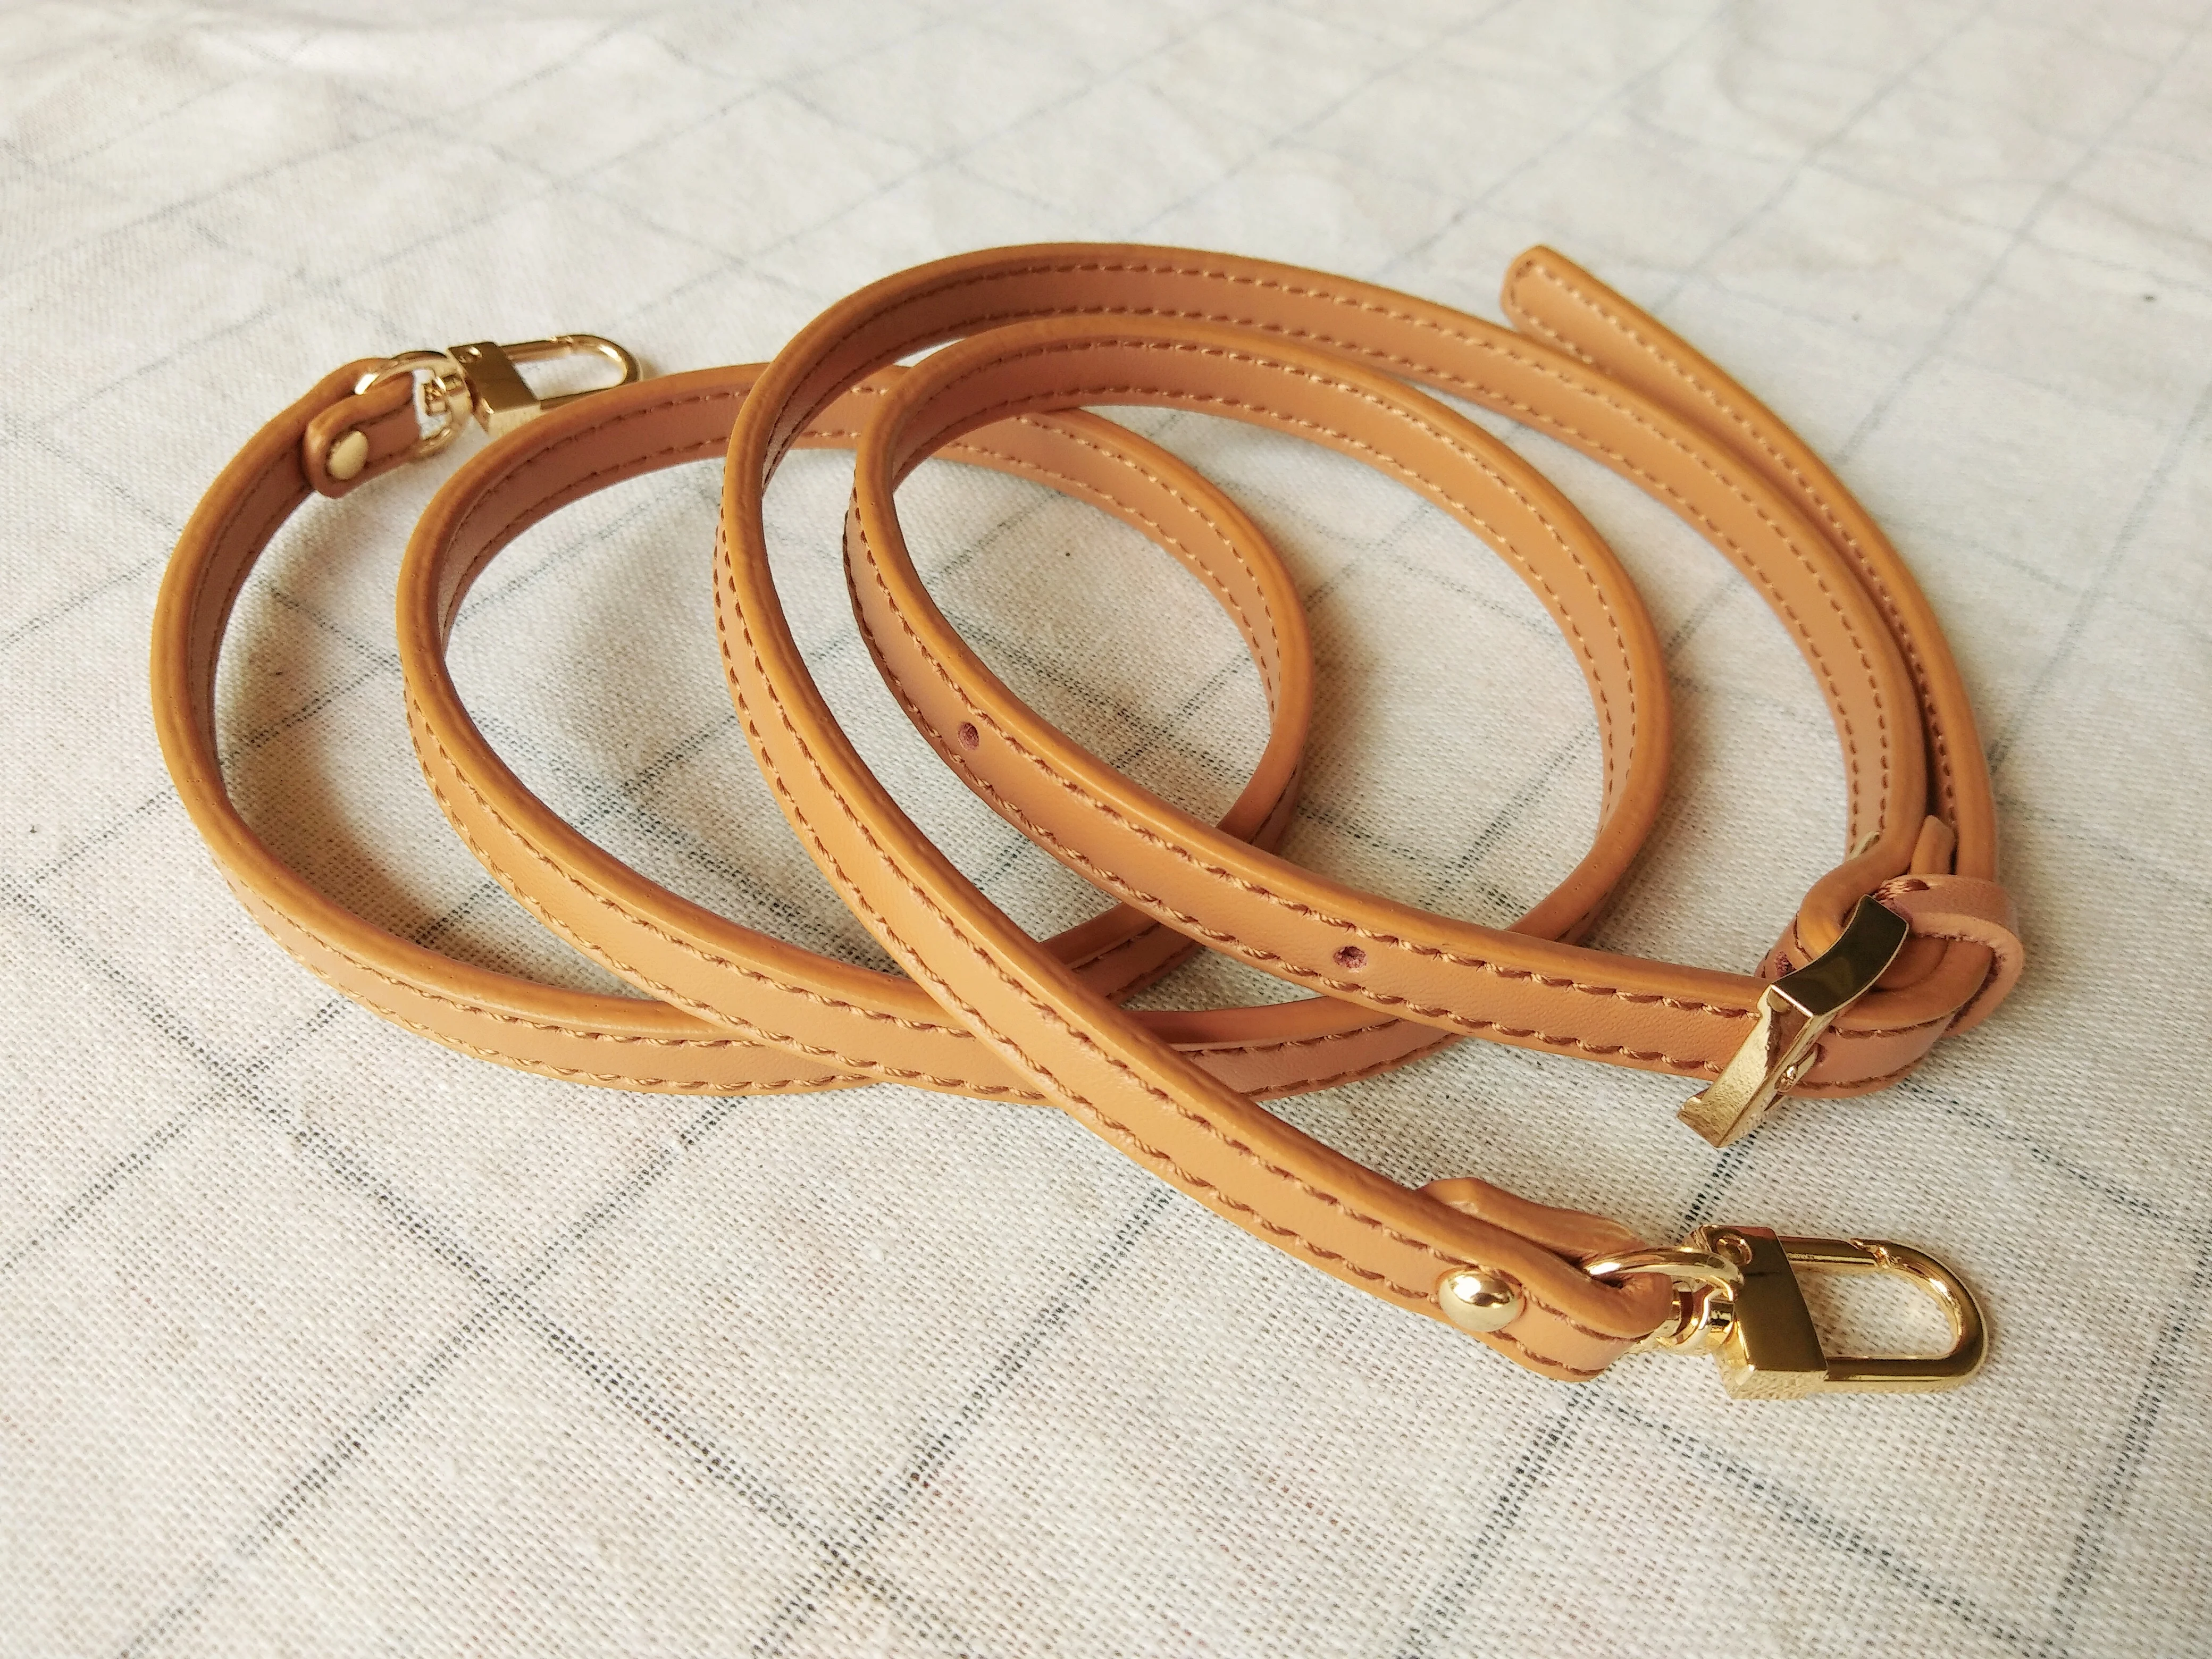 Luxury Crossbody strap replacement 2.5*123cm adjustable real